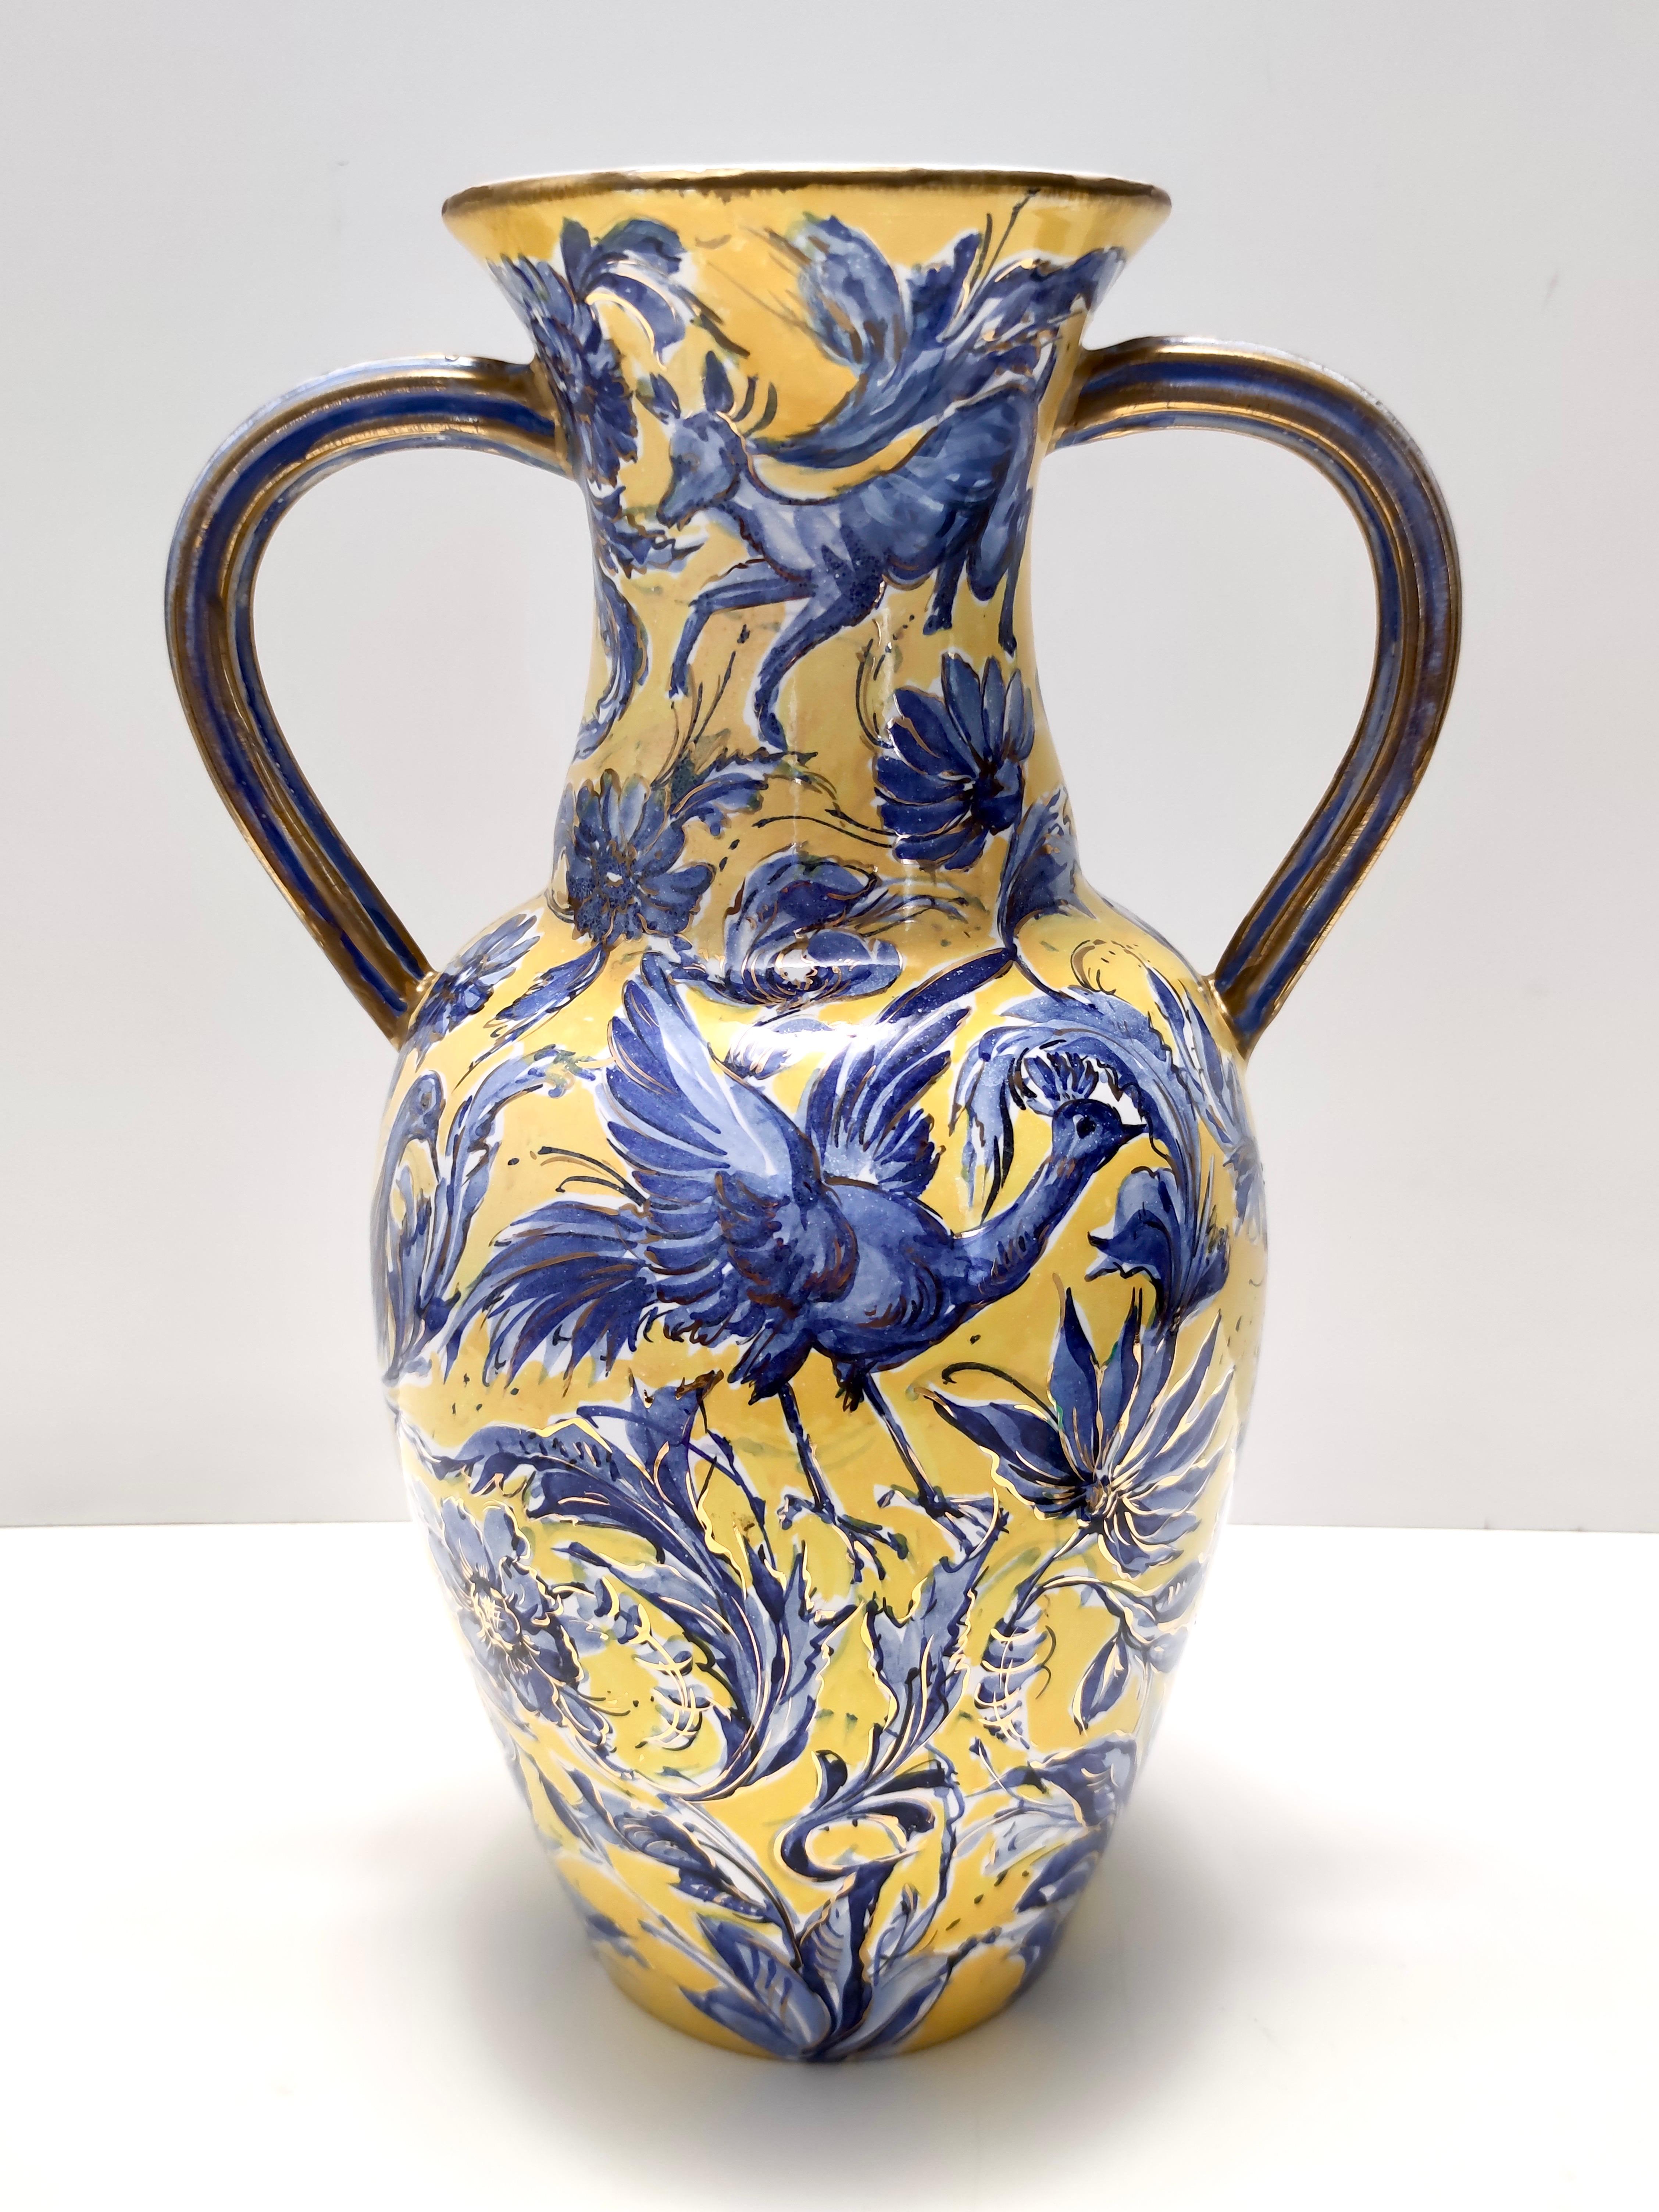 Italian Handmade Yellow and Blue Glazed Ceramic Amphora Vase by Zulimo Aretini, Italy For Sale